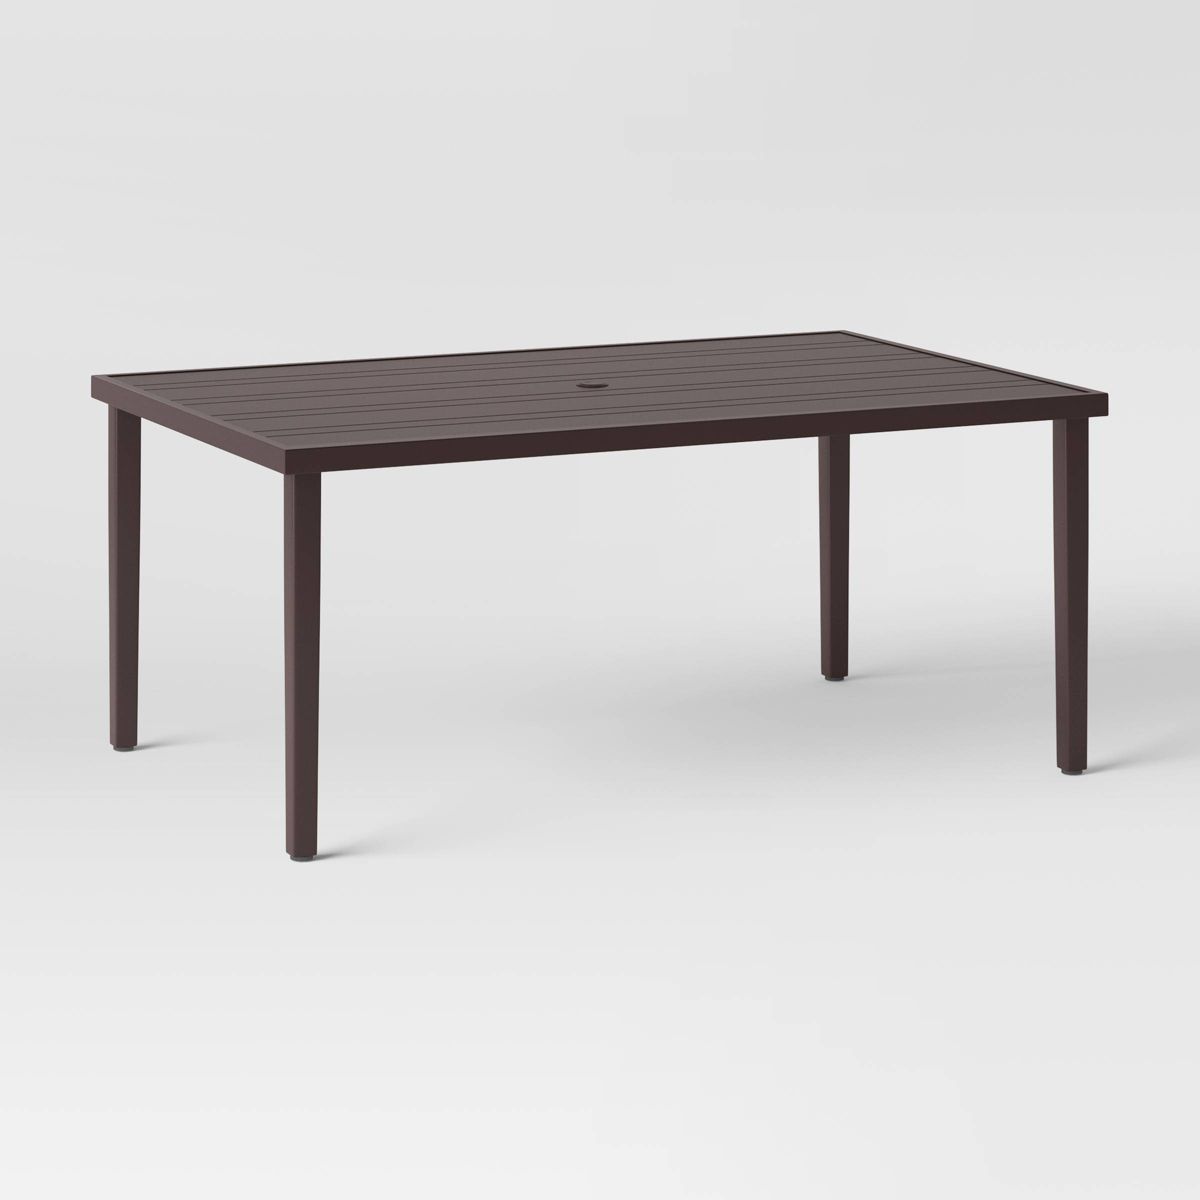 Brookfield Rectangle Patio Dining Table - Light Brown - Threshold™ | Target